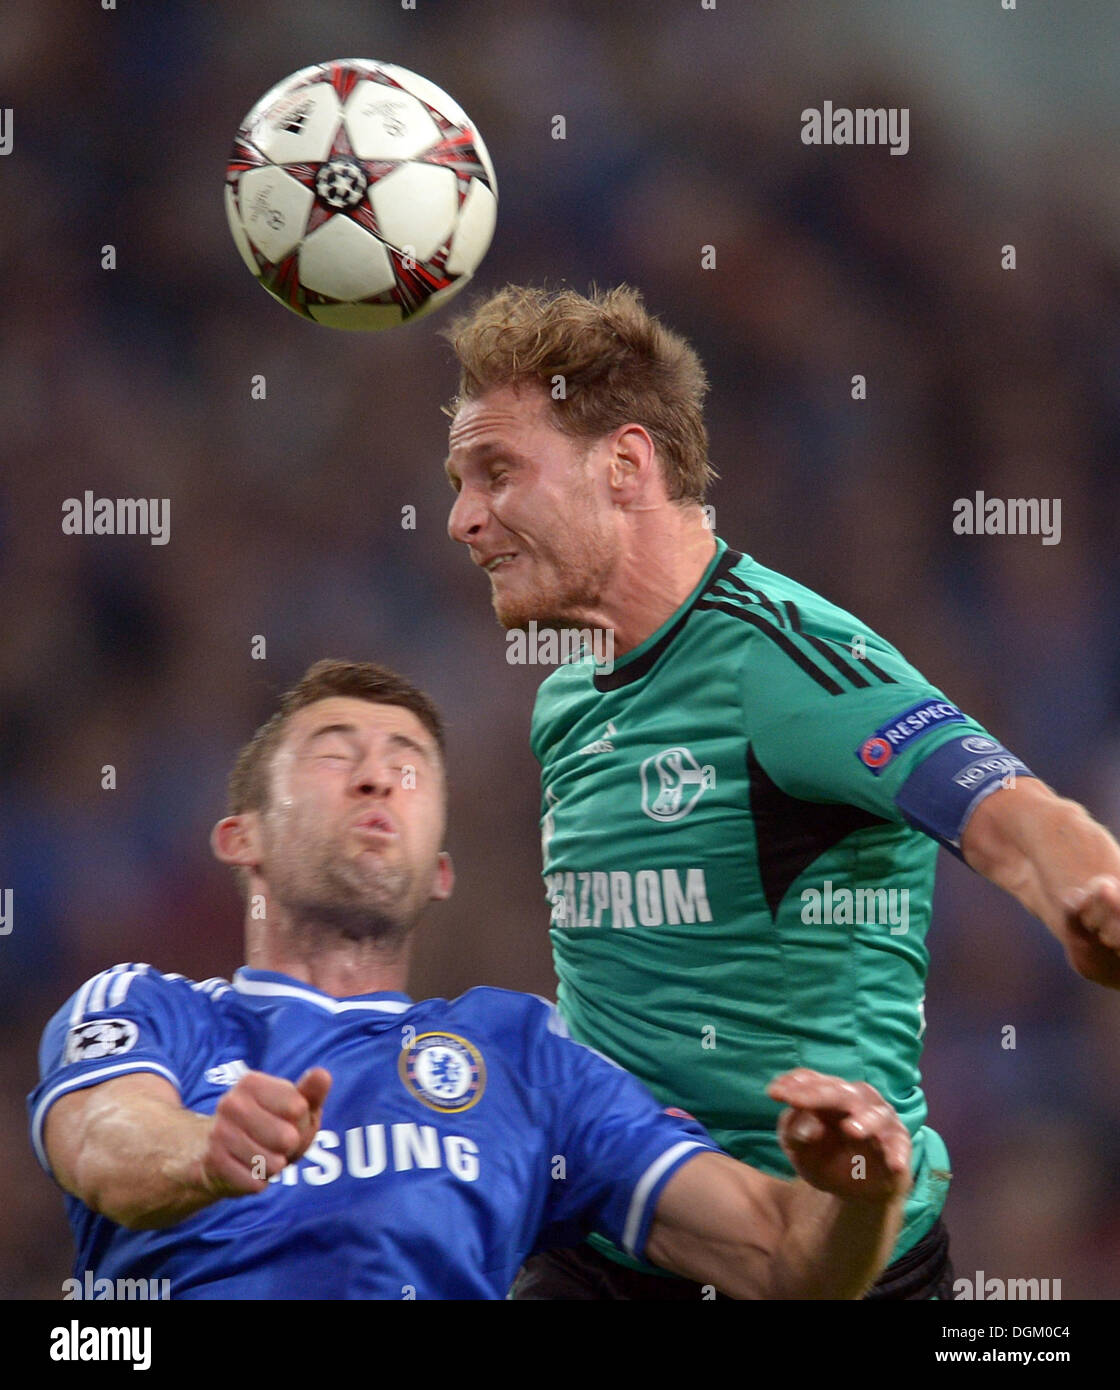 Gelsenkirchen, Germany. 22nd Oct, 2013. Schalke's Benedikt Hoewedes (R) vies for the ball with Chelsea's Gary Cahill during the Champions League group E soccer match betwen FC Schalke 04 and FC Chelsea at the Gelsenkirchen stadium in Gelsenkirchen, Germany, 22 October 2013. Photo: Federico Gambarini/dpa/Alamy Live News Stock Photo